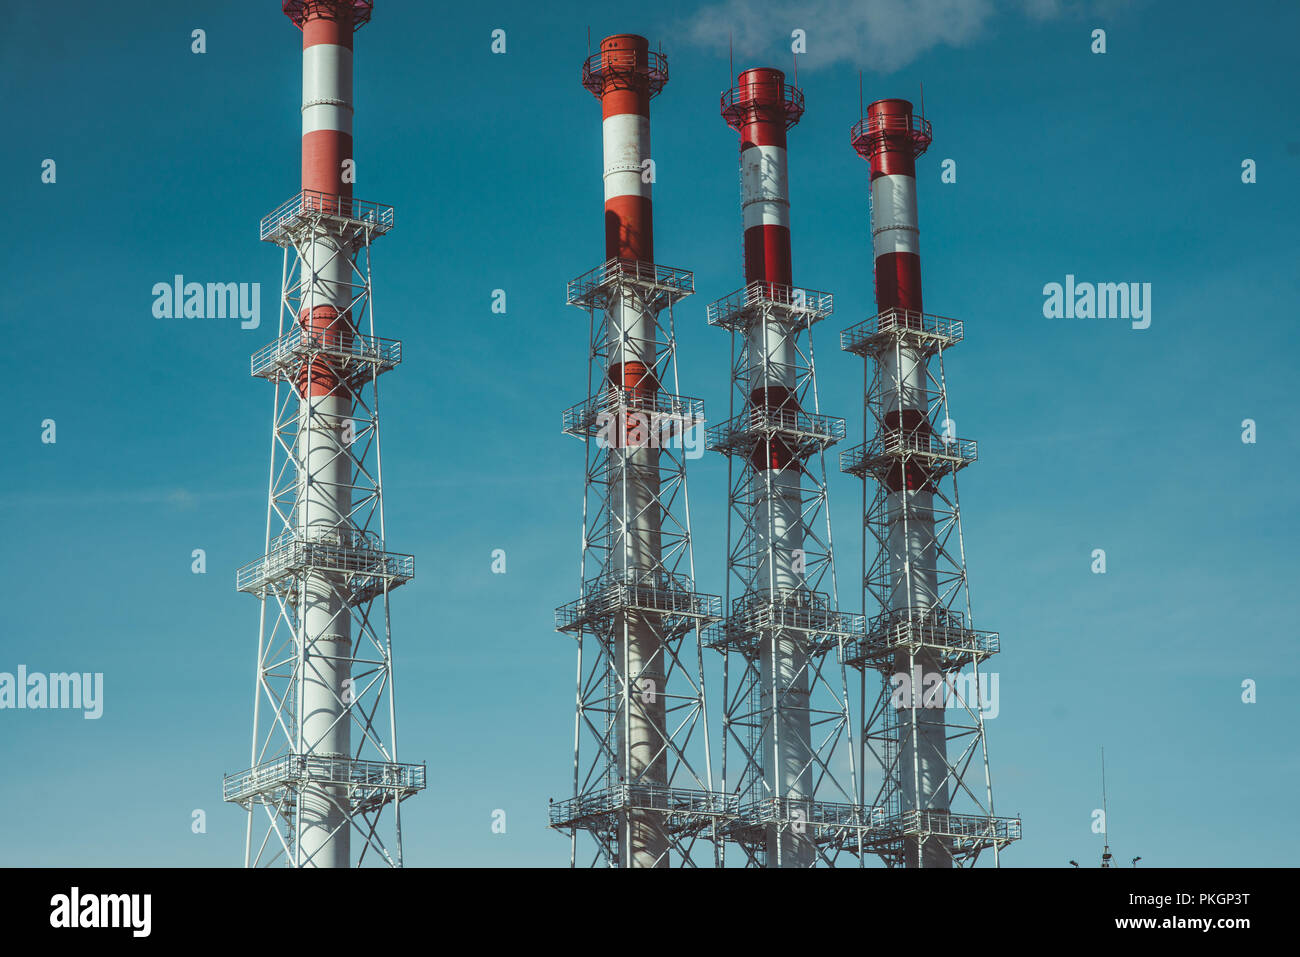 Industrial zone,The equipment of oil refining,Close-up of industrial pipelines of an oil-refinery plant Stock Photo